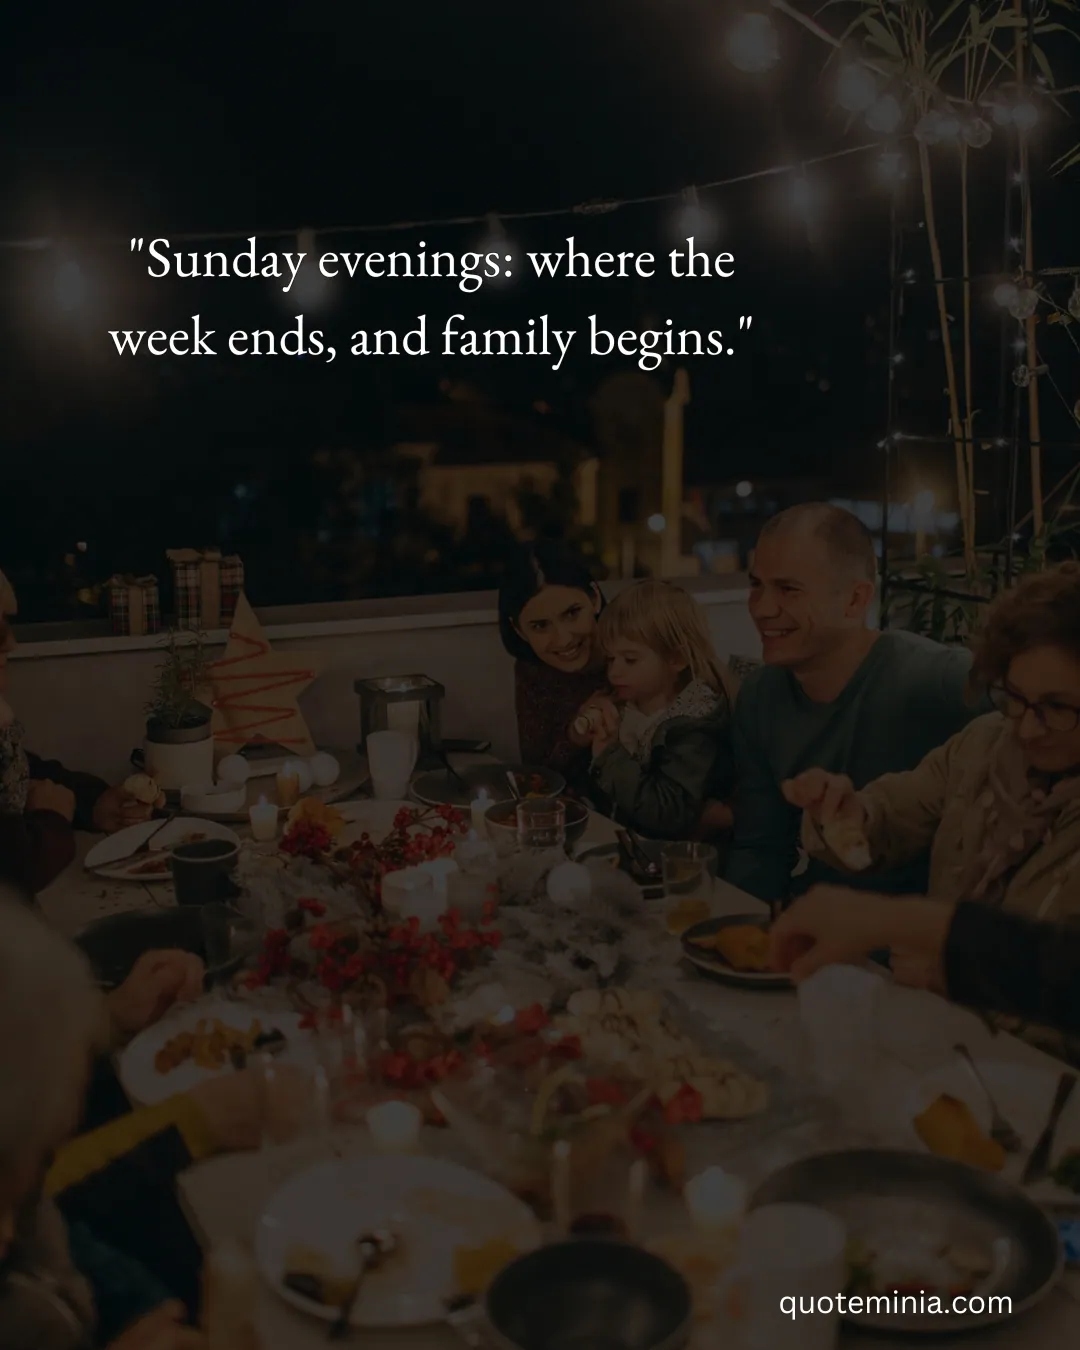 Sunday Family Dinner Quotes 1